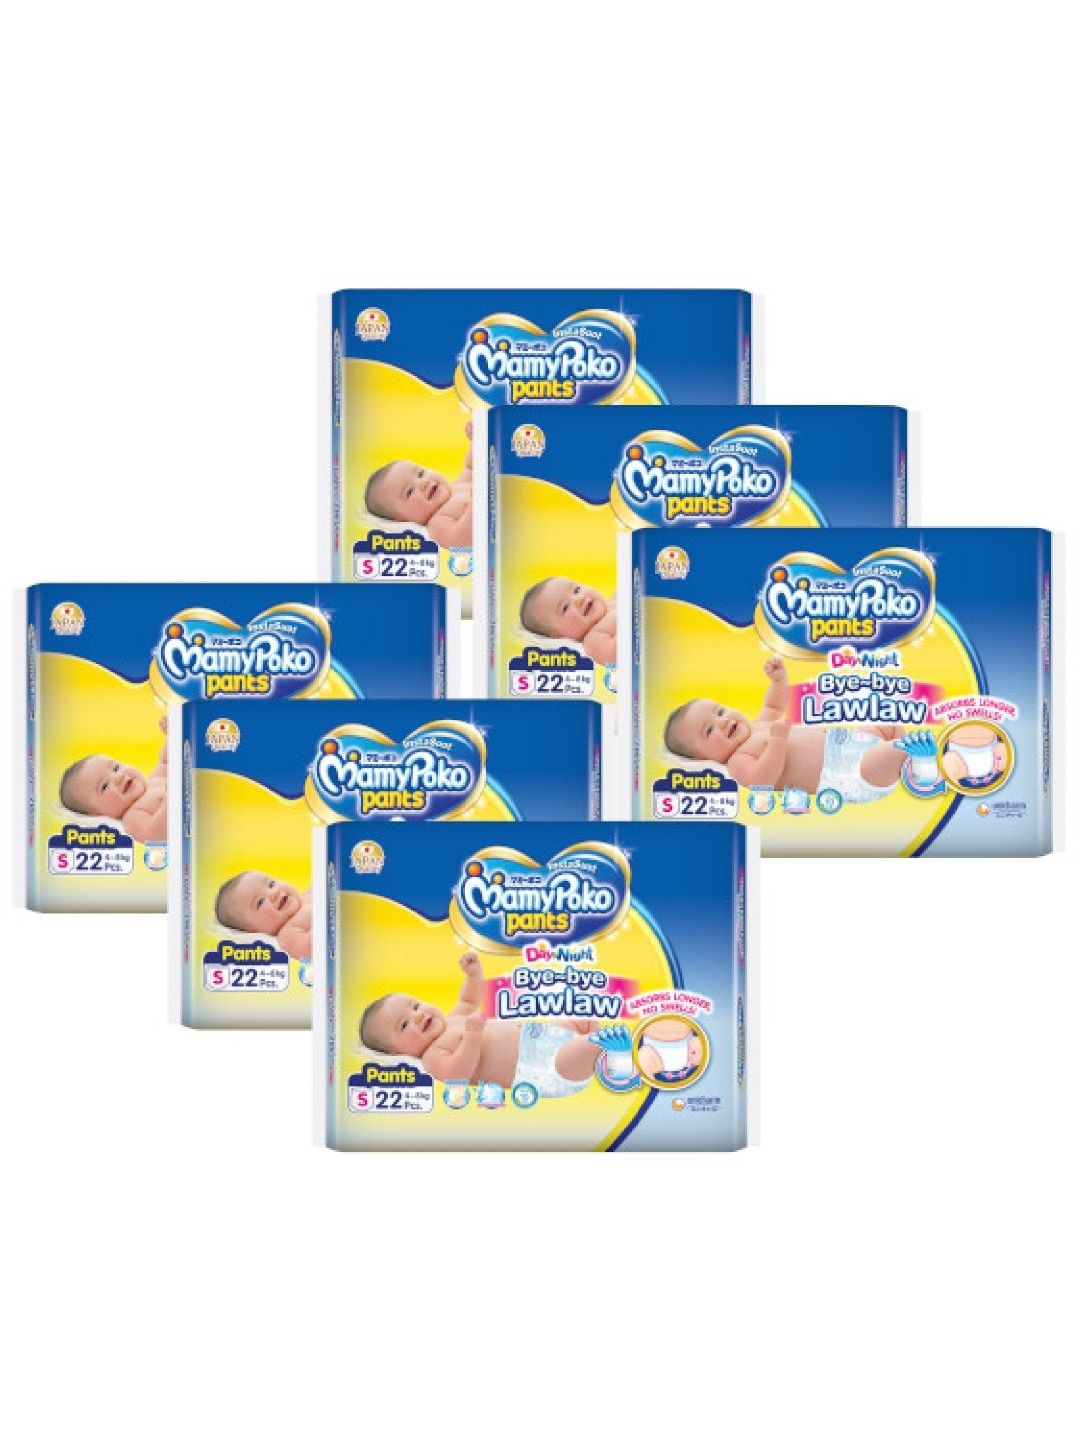 Lowest Prices on all your Essential Groceries and Home Care MamyPoko Pants  Standard Diapers  S